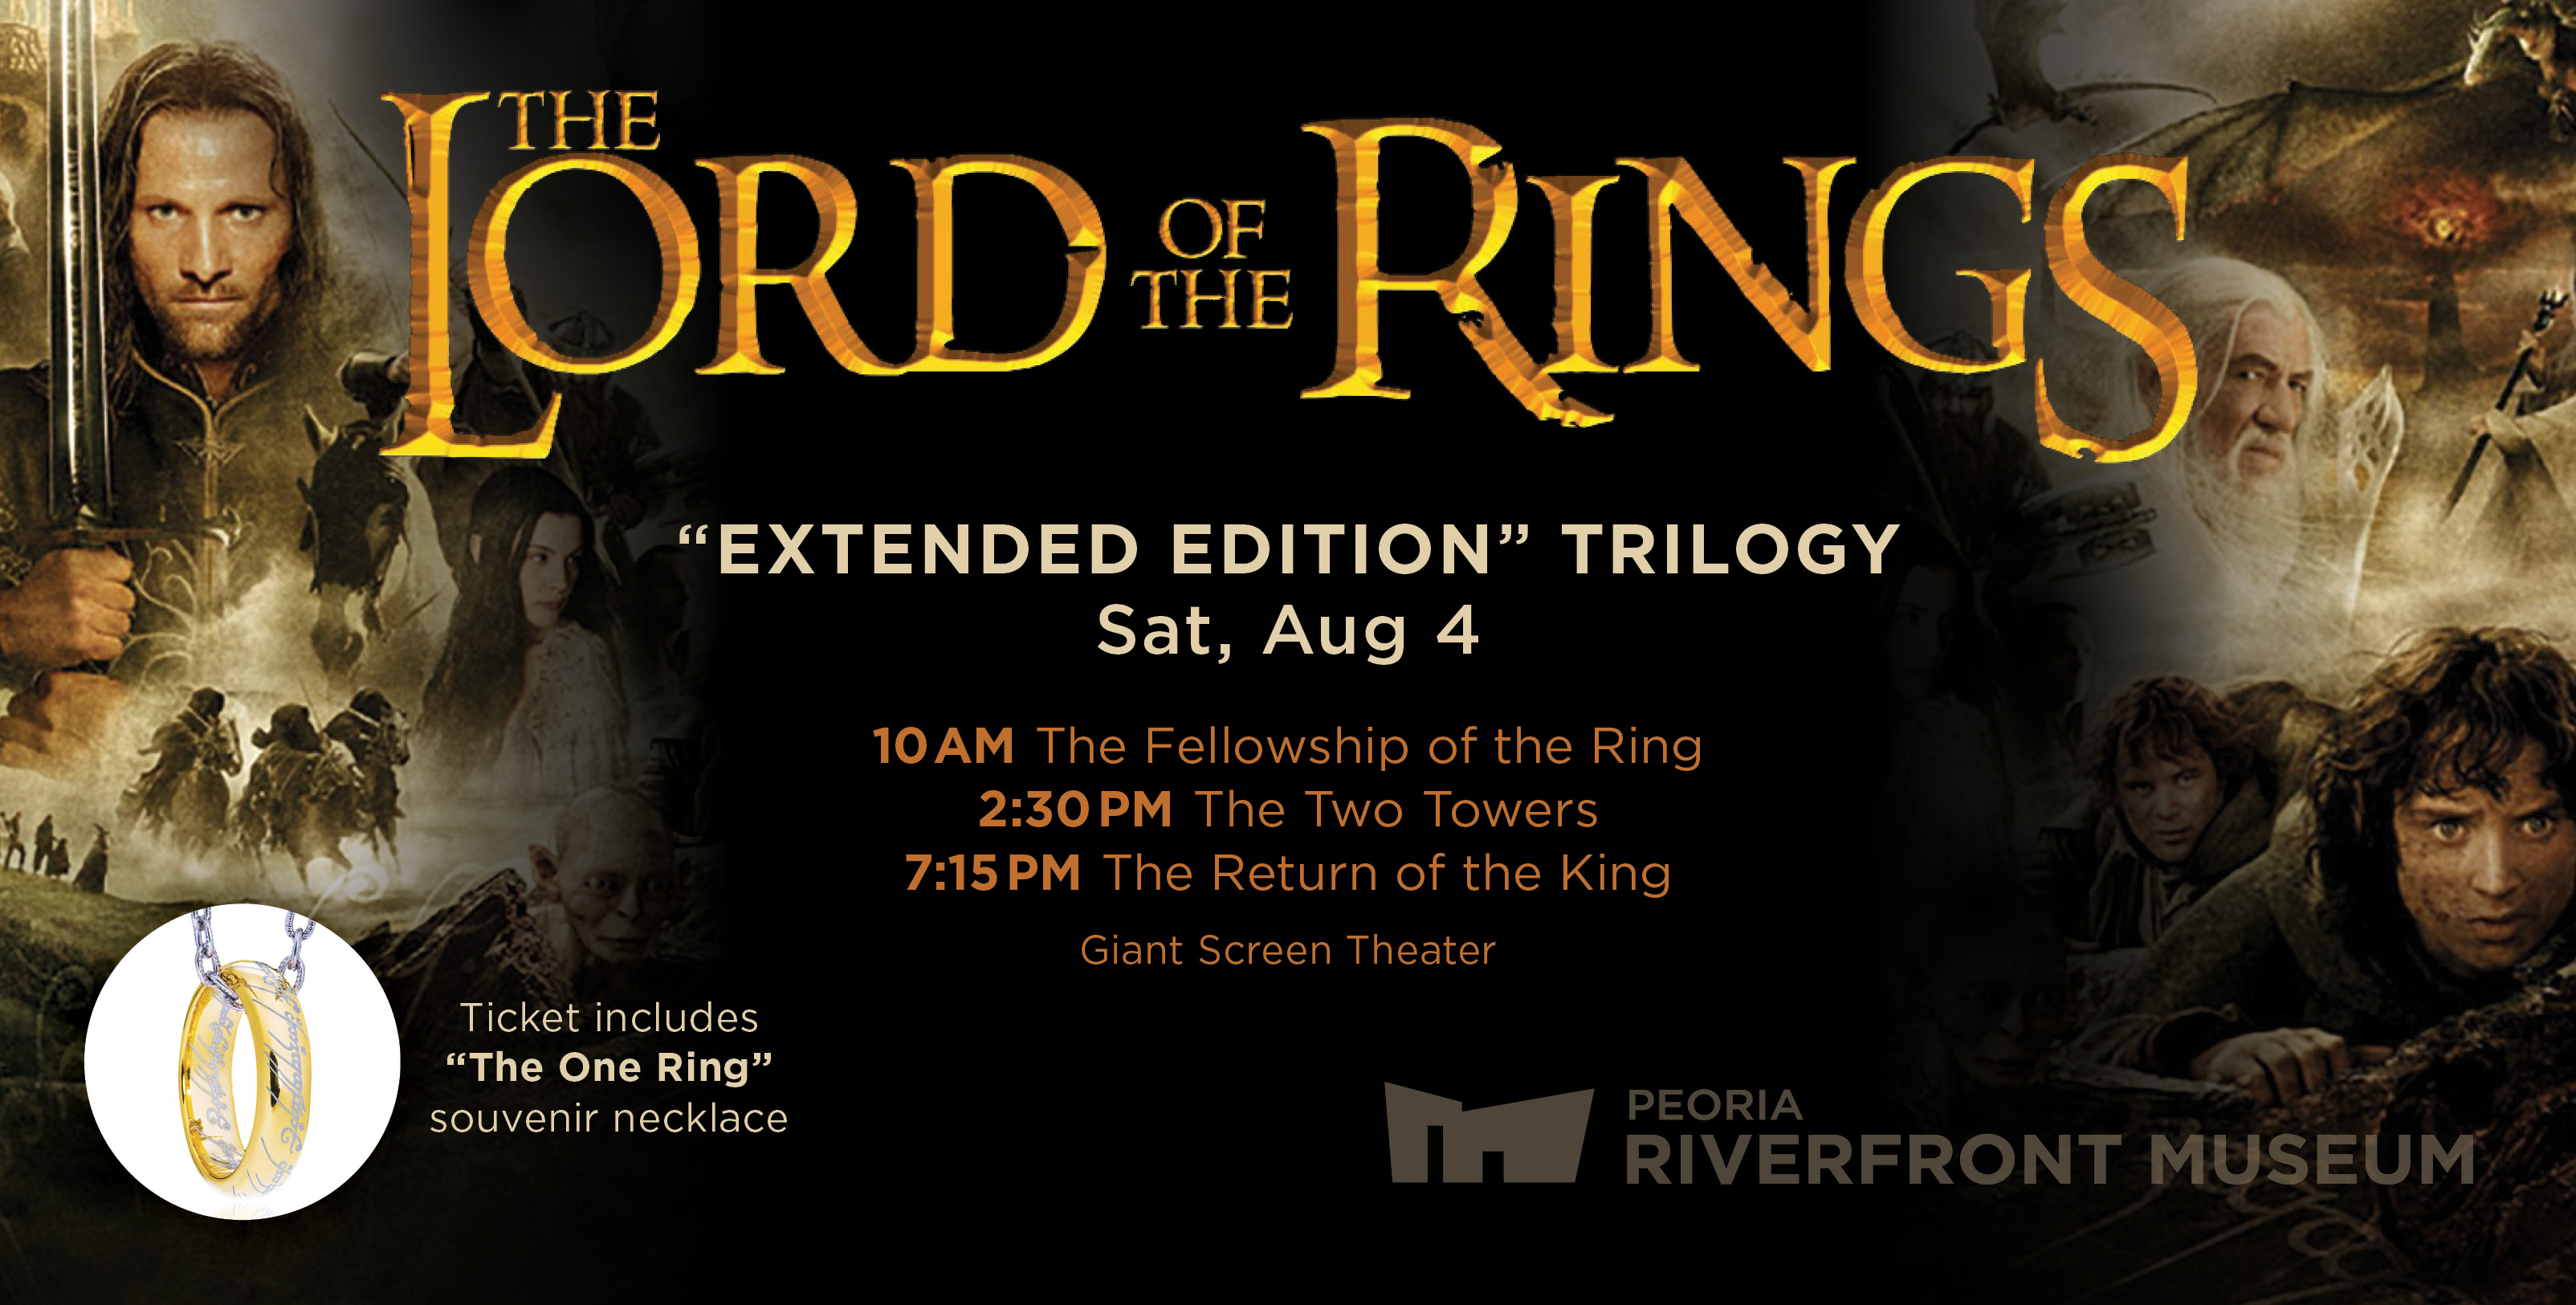 Movies with a Message: The Lord of the Rings Trilogy